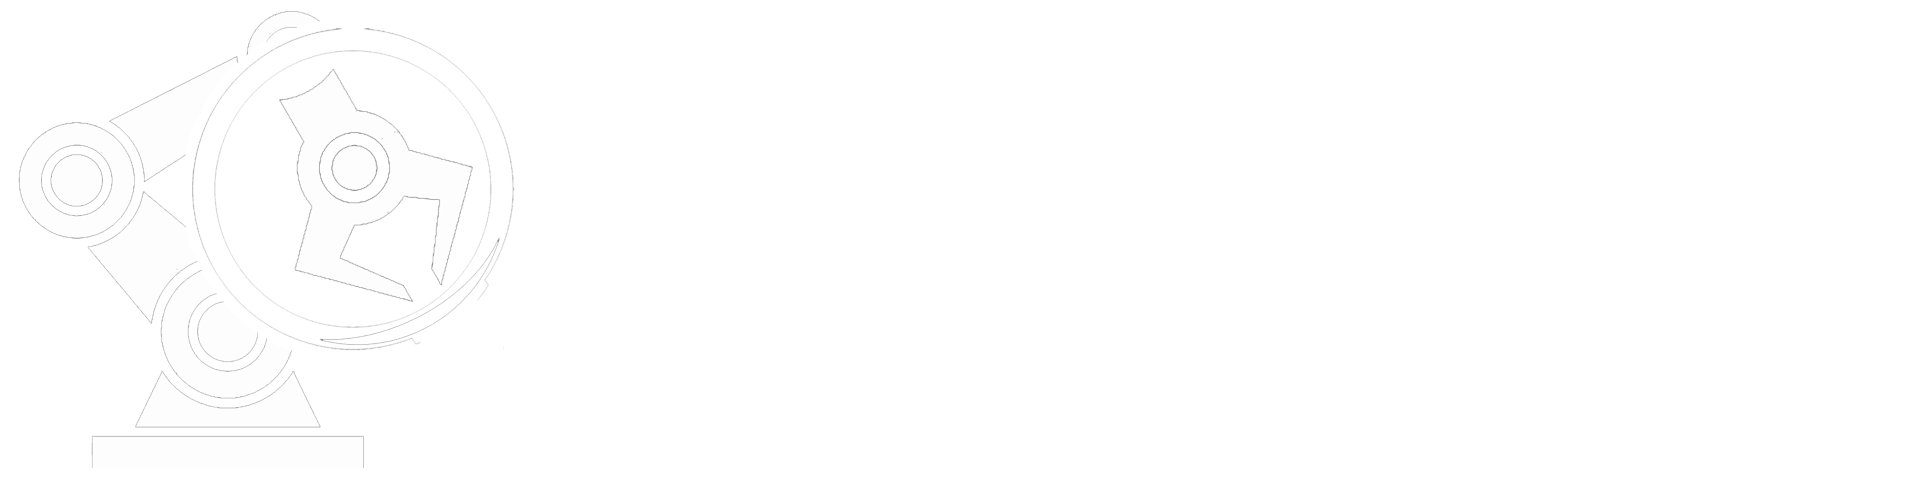 Finding Automation